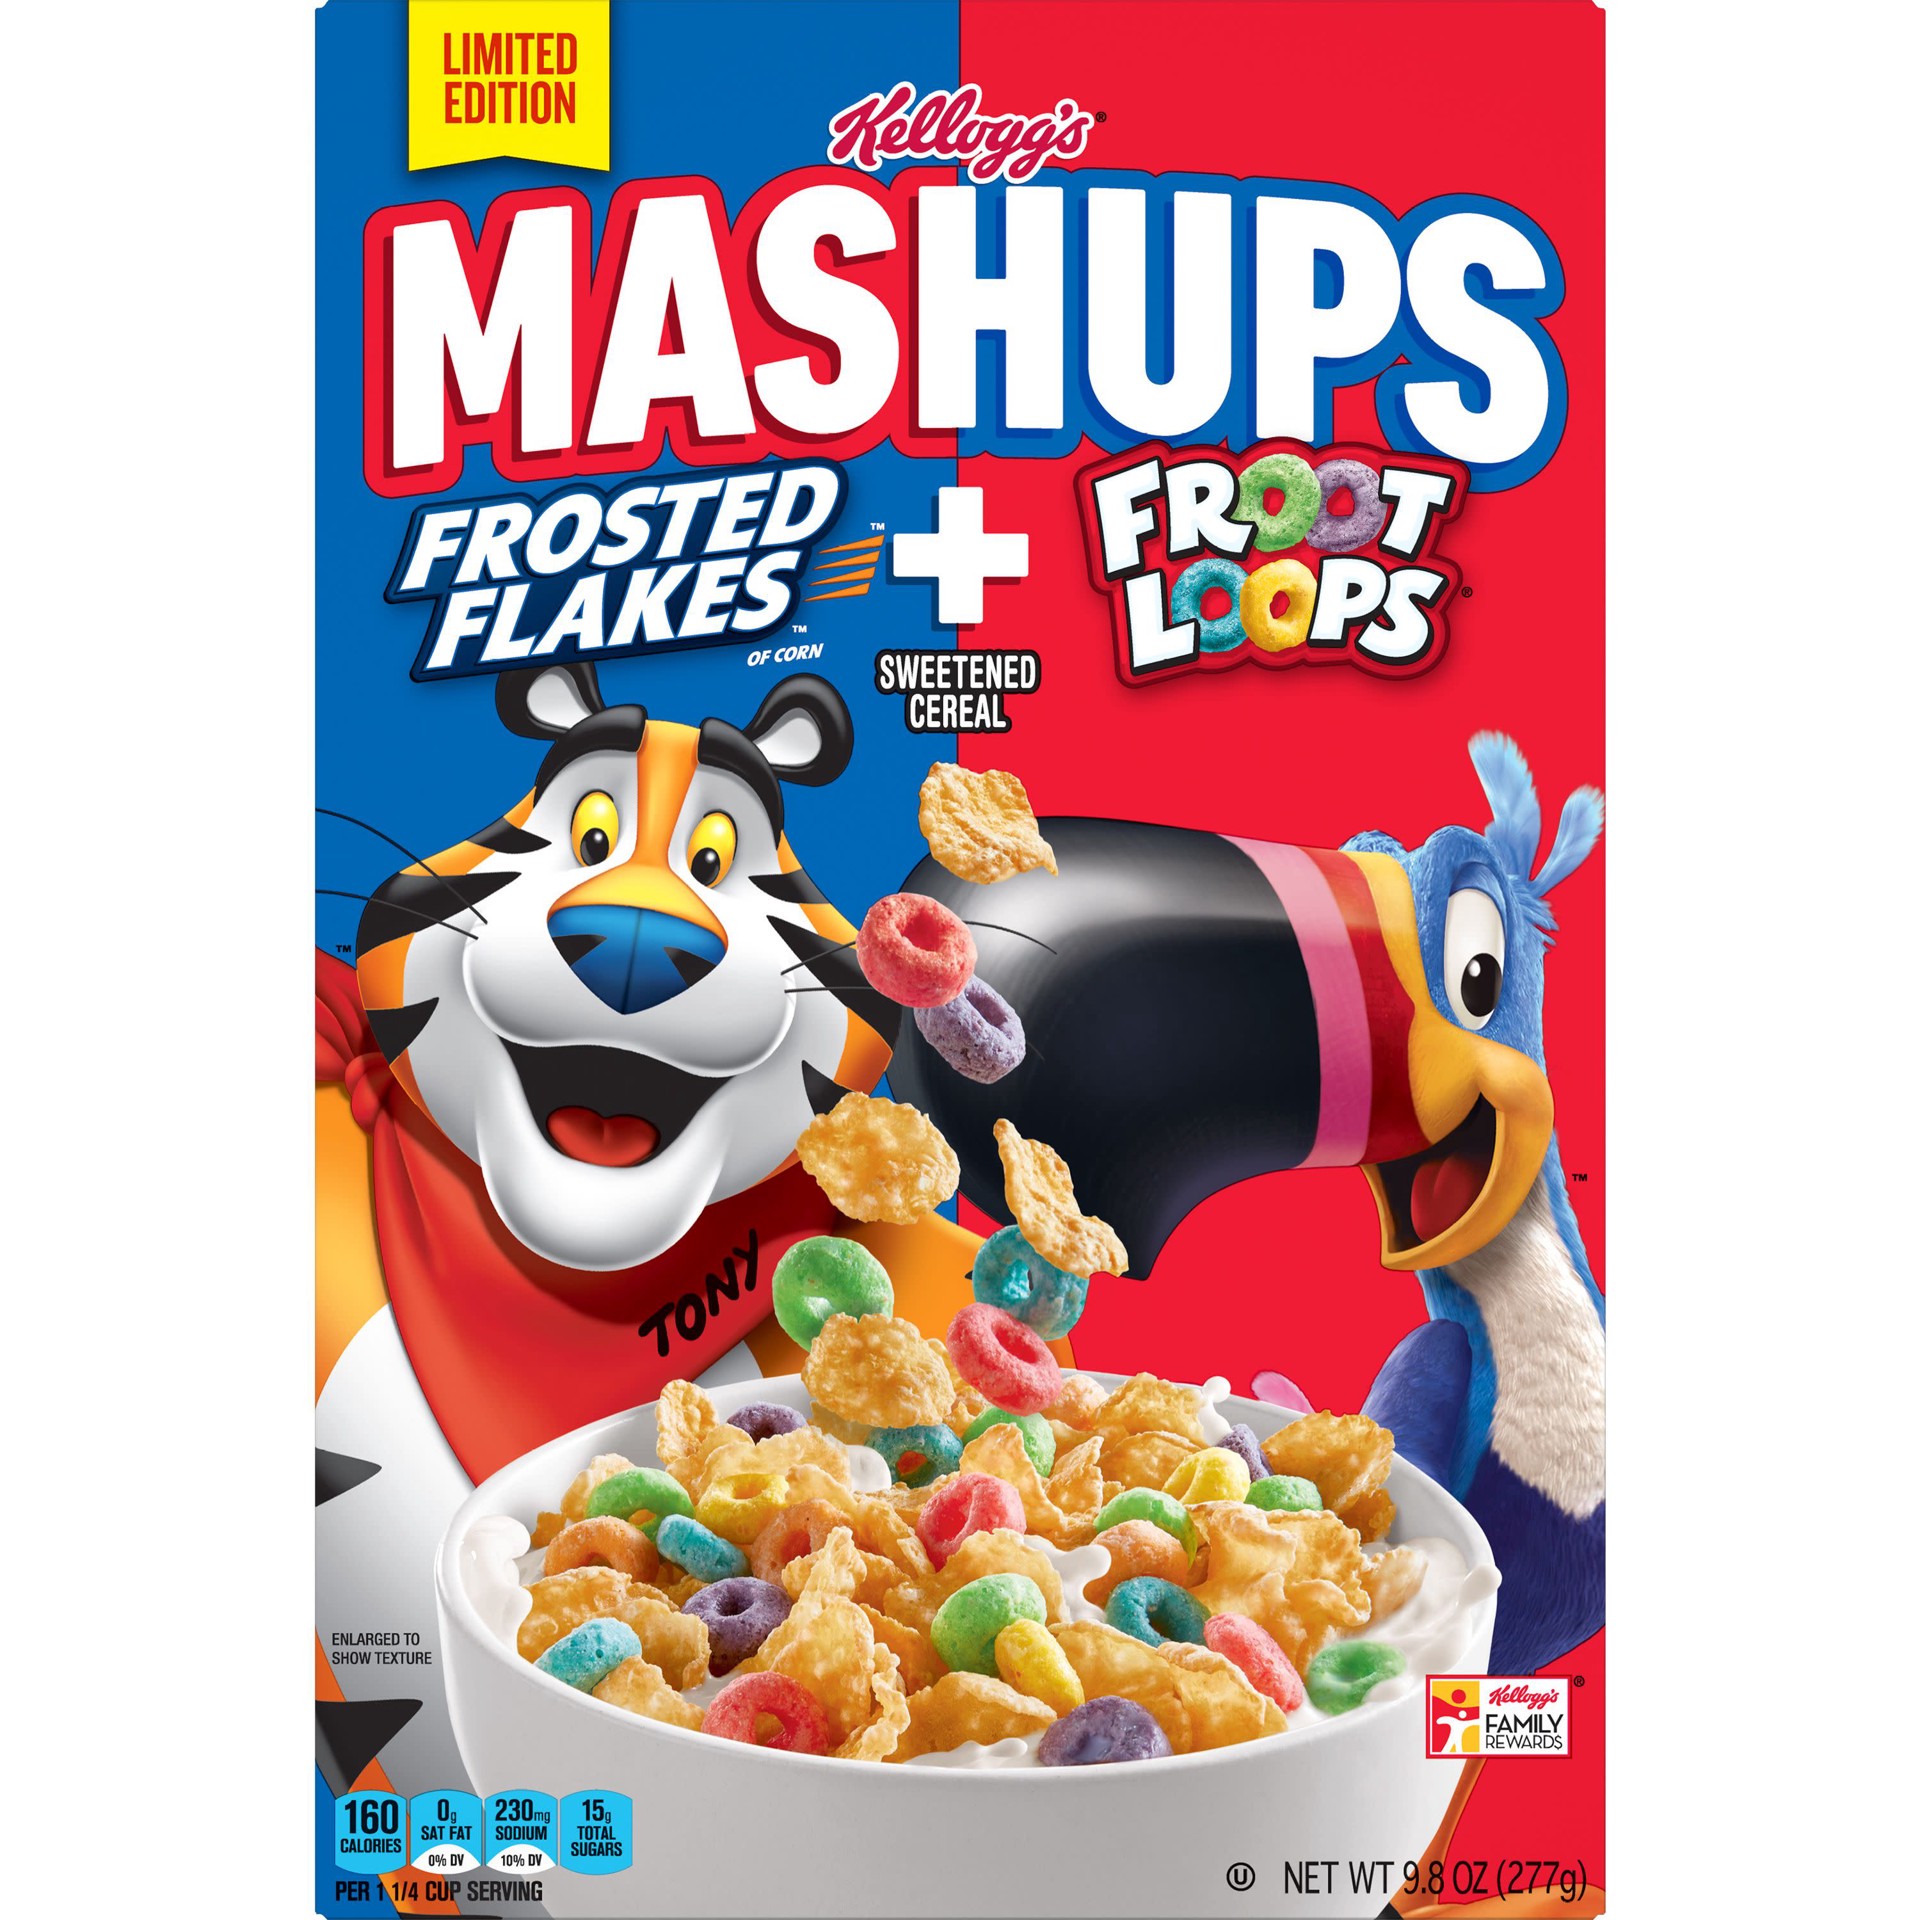 slide 5 of 5, Mashups Kellogg's Mashups Breakfast Cereal, Limited Edition, Kids Snacks, Frosted Flakes and Froot Loops, 9.8oz Box, 1 Box, 9.8 oz